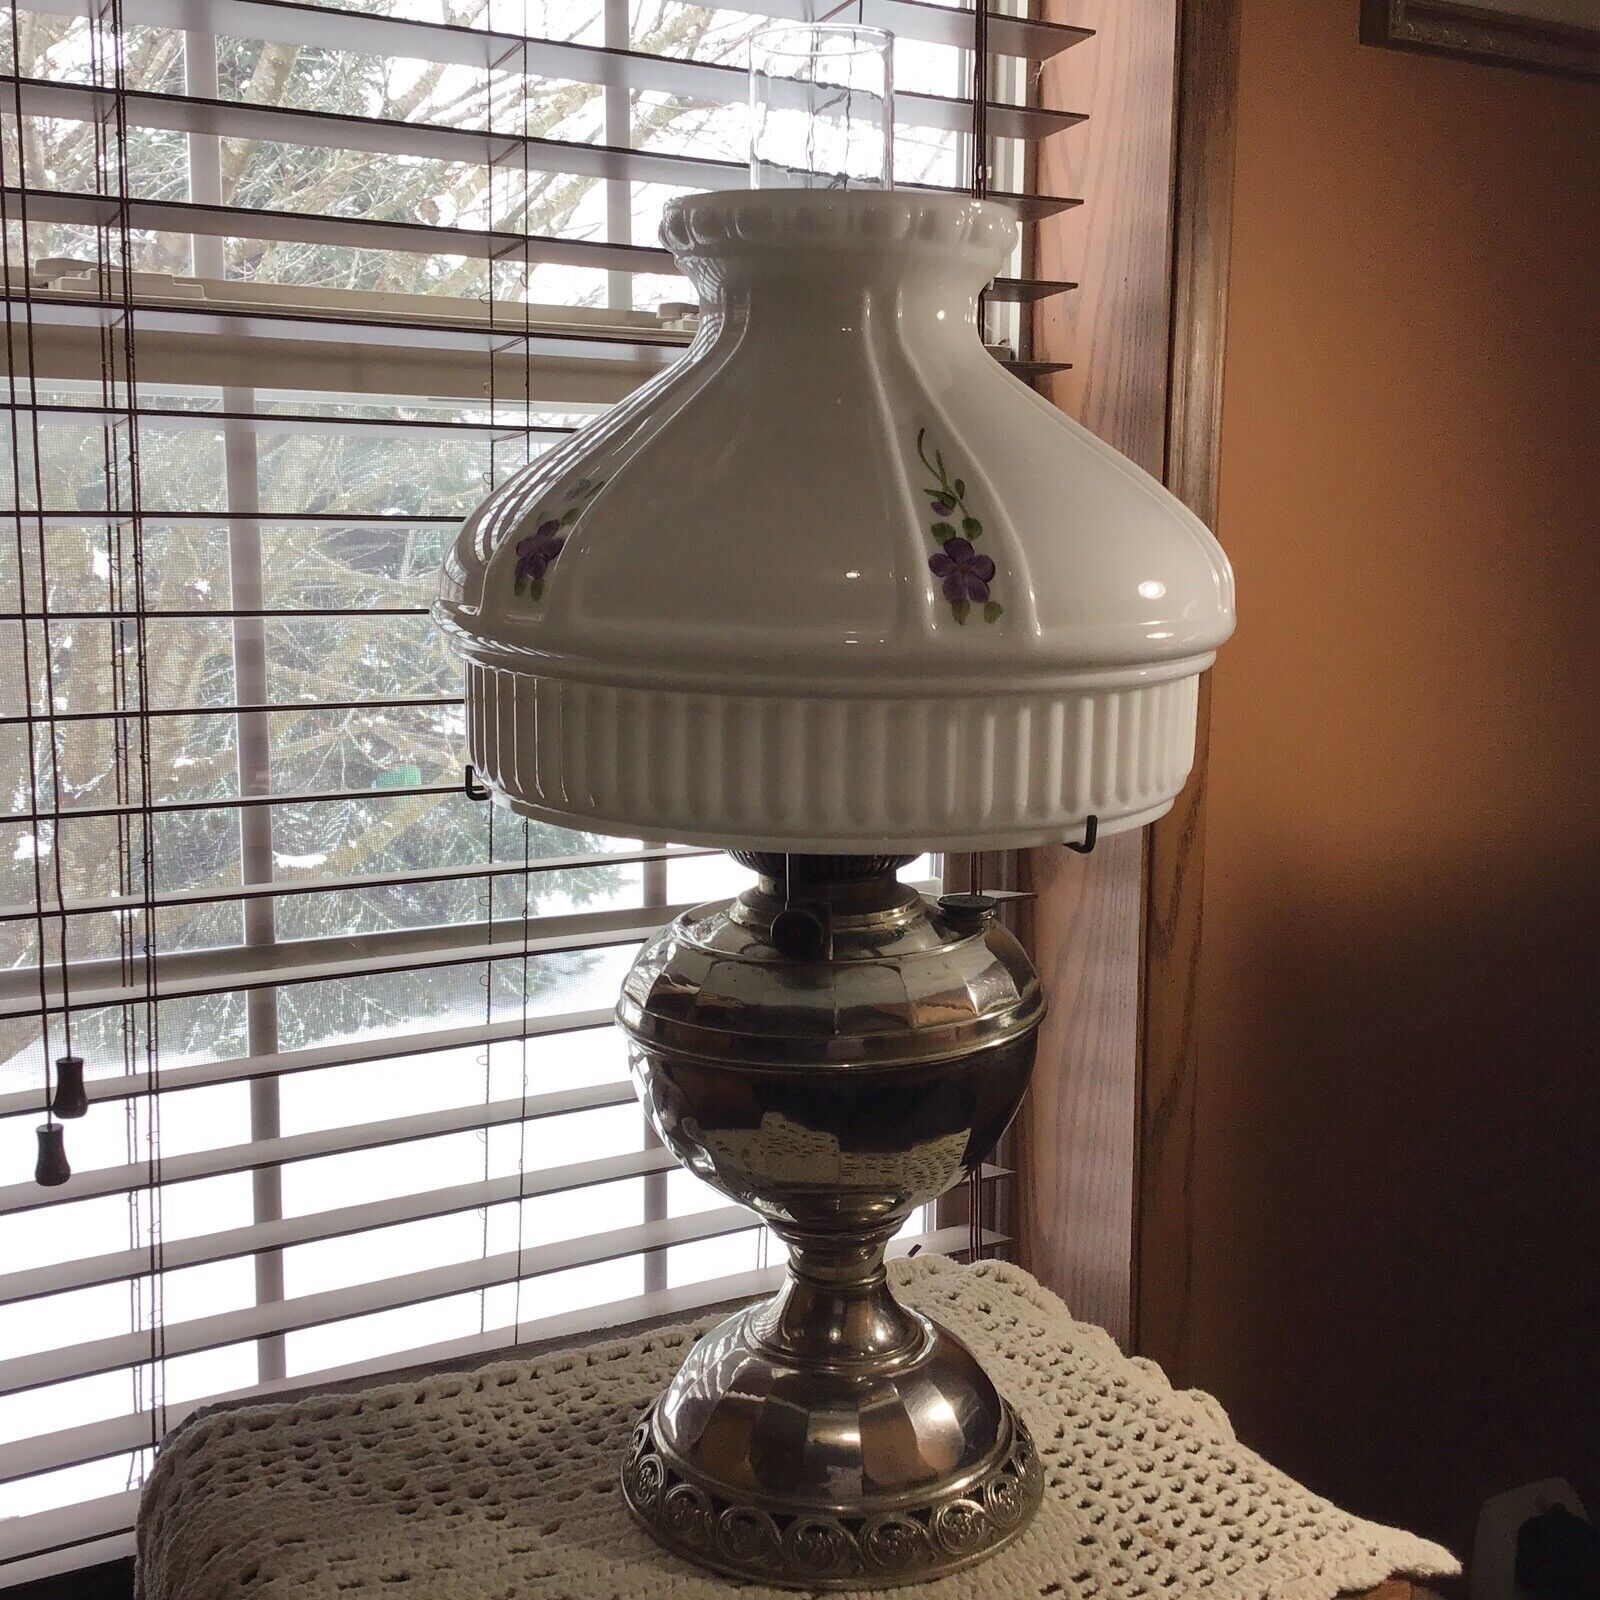 1898 Bradley Hubbard Radiant paneled nicket pedestal oil lamp with wick & shade